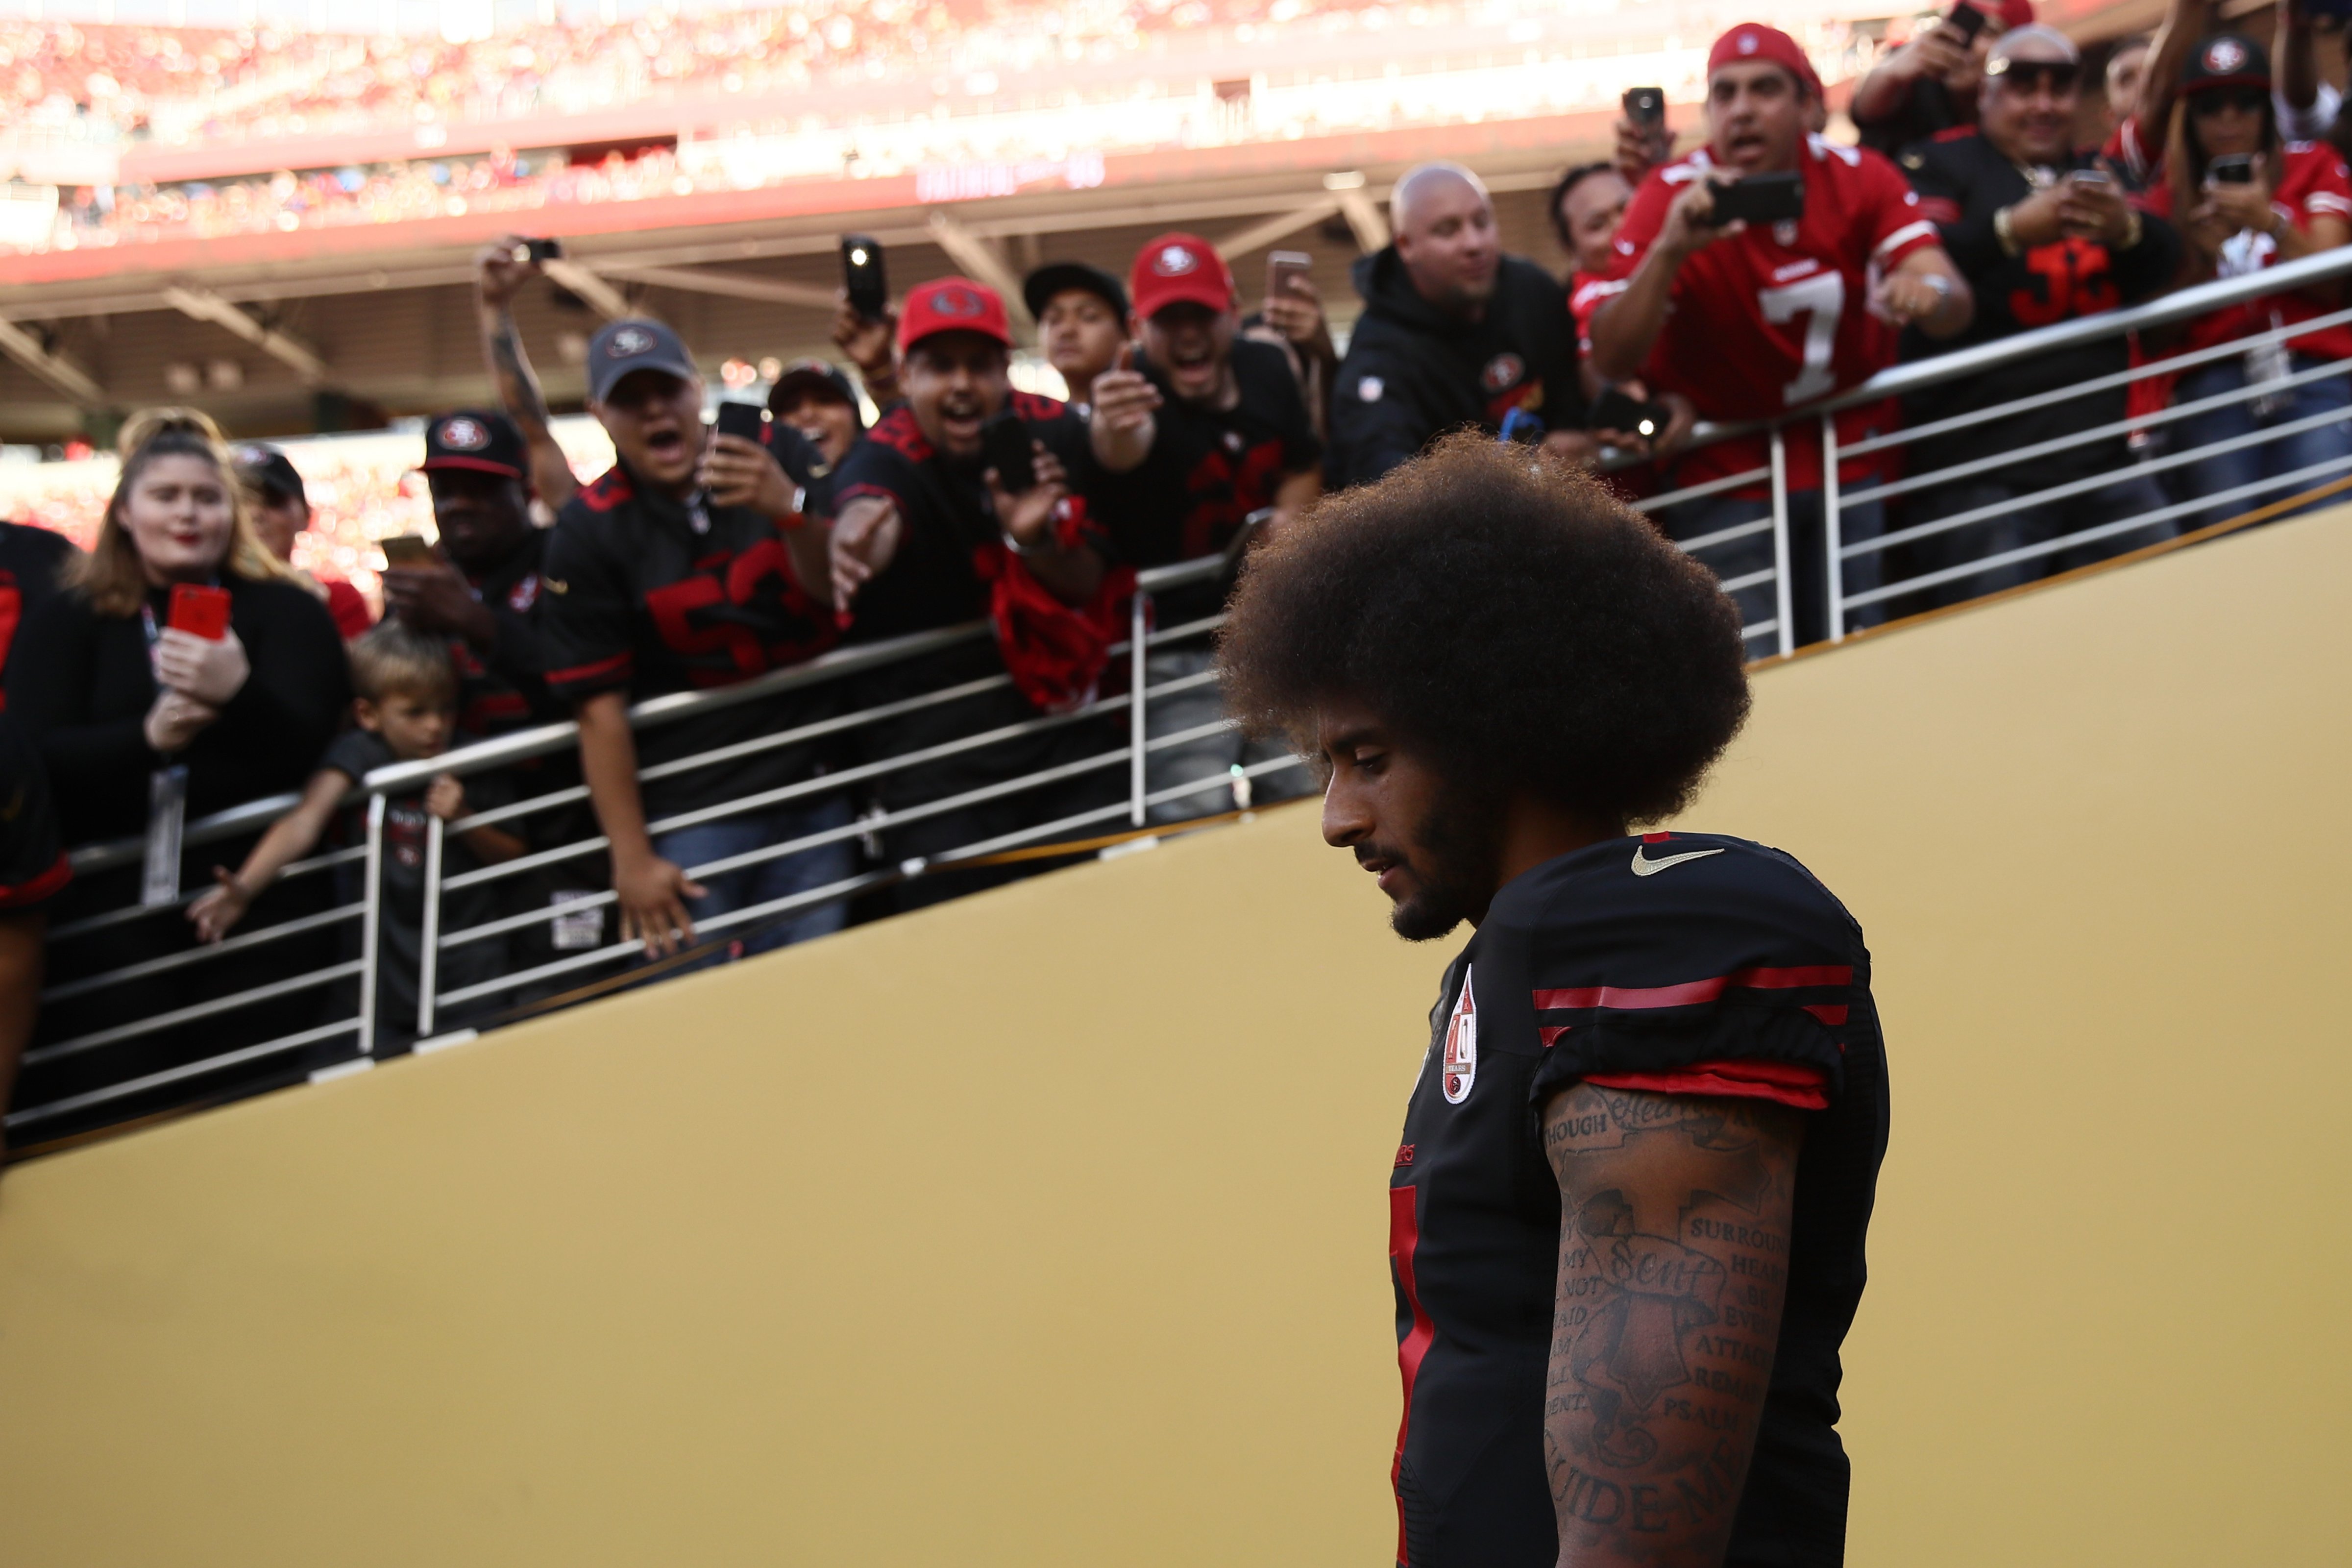 Colin Kaepernick, quarterback for the San Francisco 49ers, walks on the field prior to the team's NFL game on October 6, 2016. (Ezra Shaw&mdash;Getty Images)